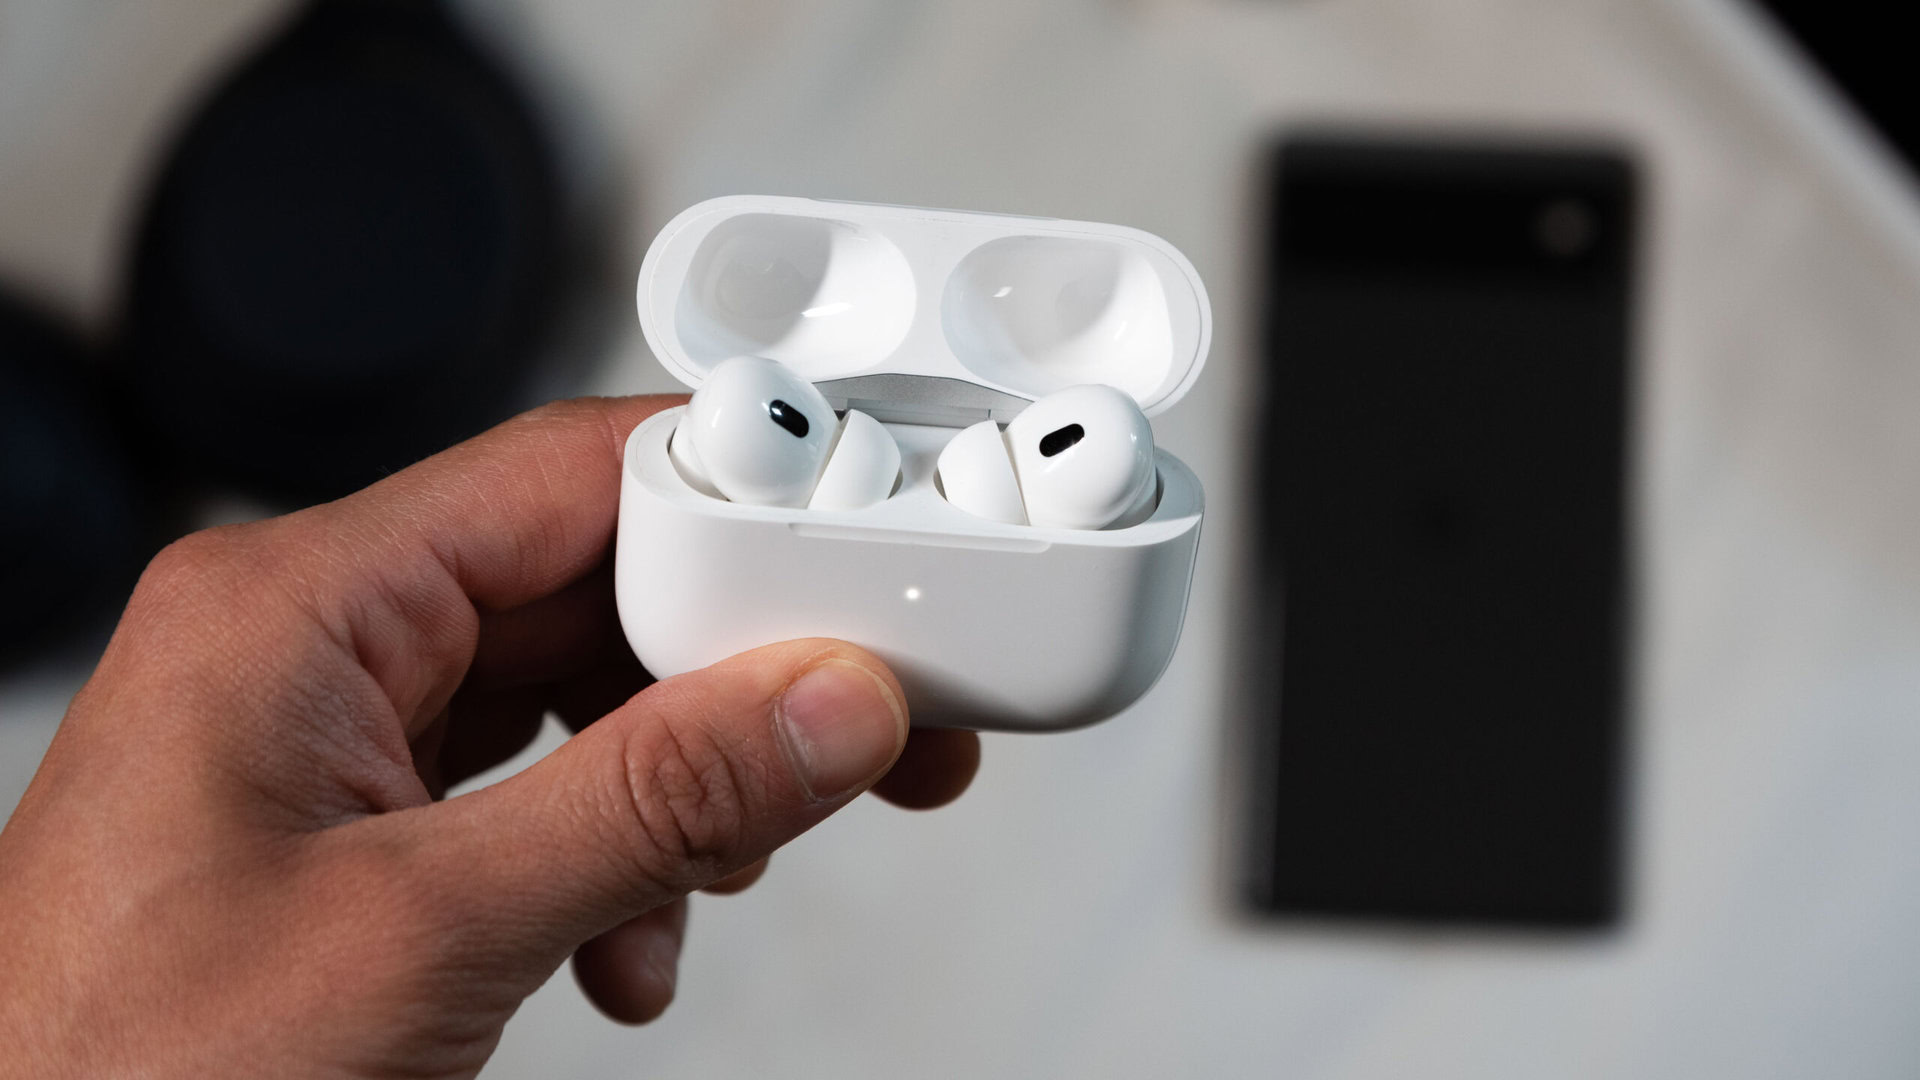 How to connect AirPods to Samsung phones or TVs - Android Authority